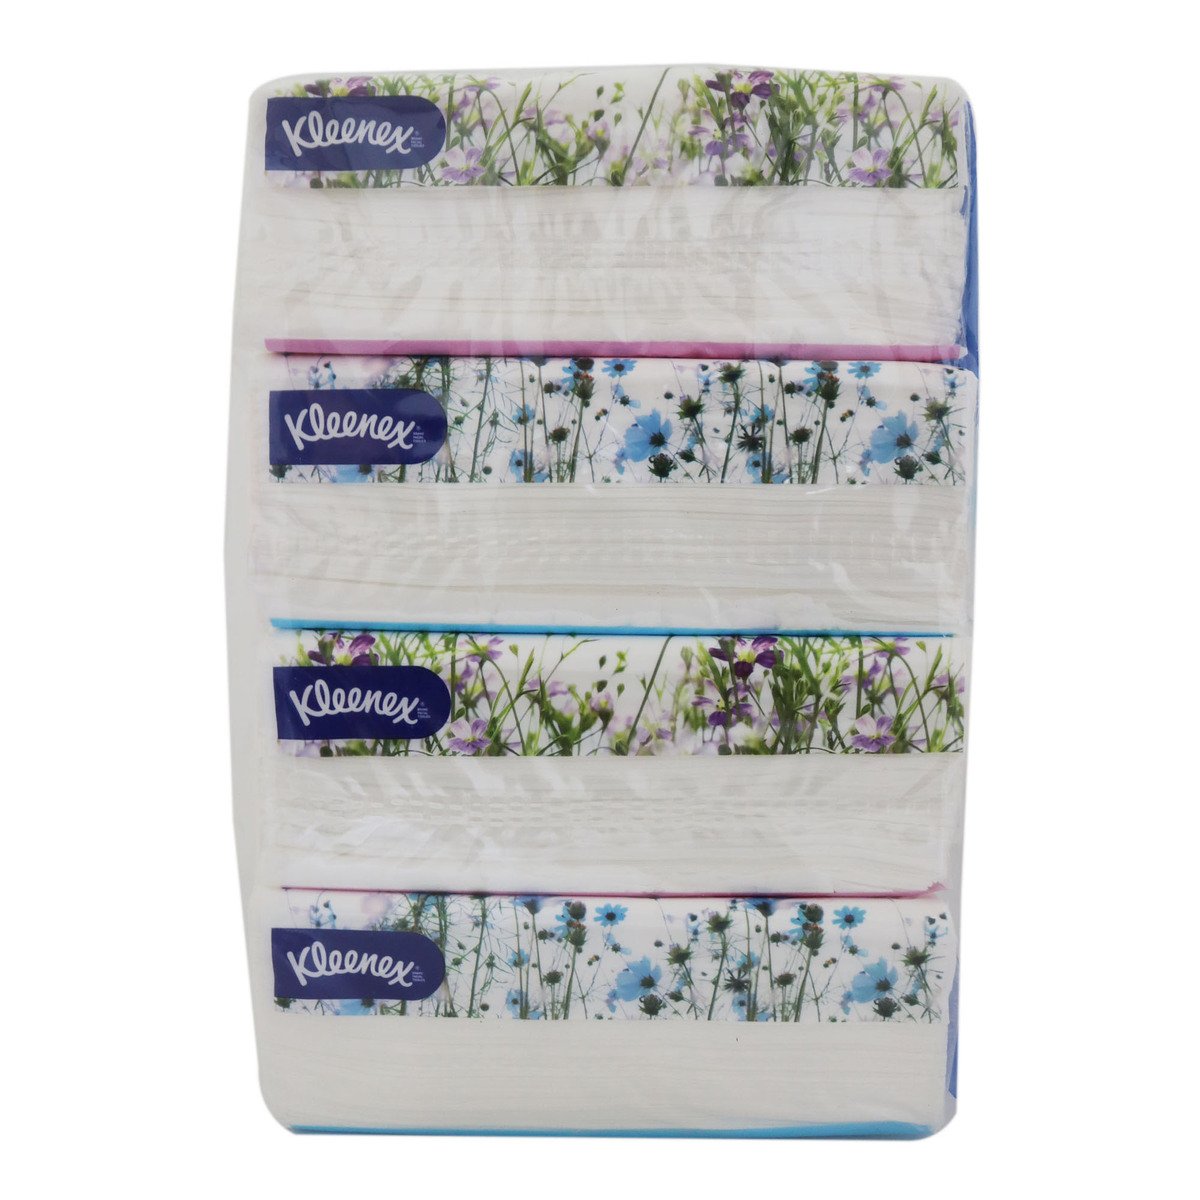 Kleenex Facial Tissue Soft Pack 2ply 4 x 180sheets